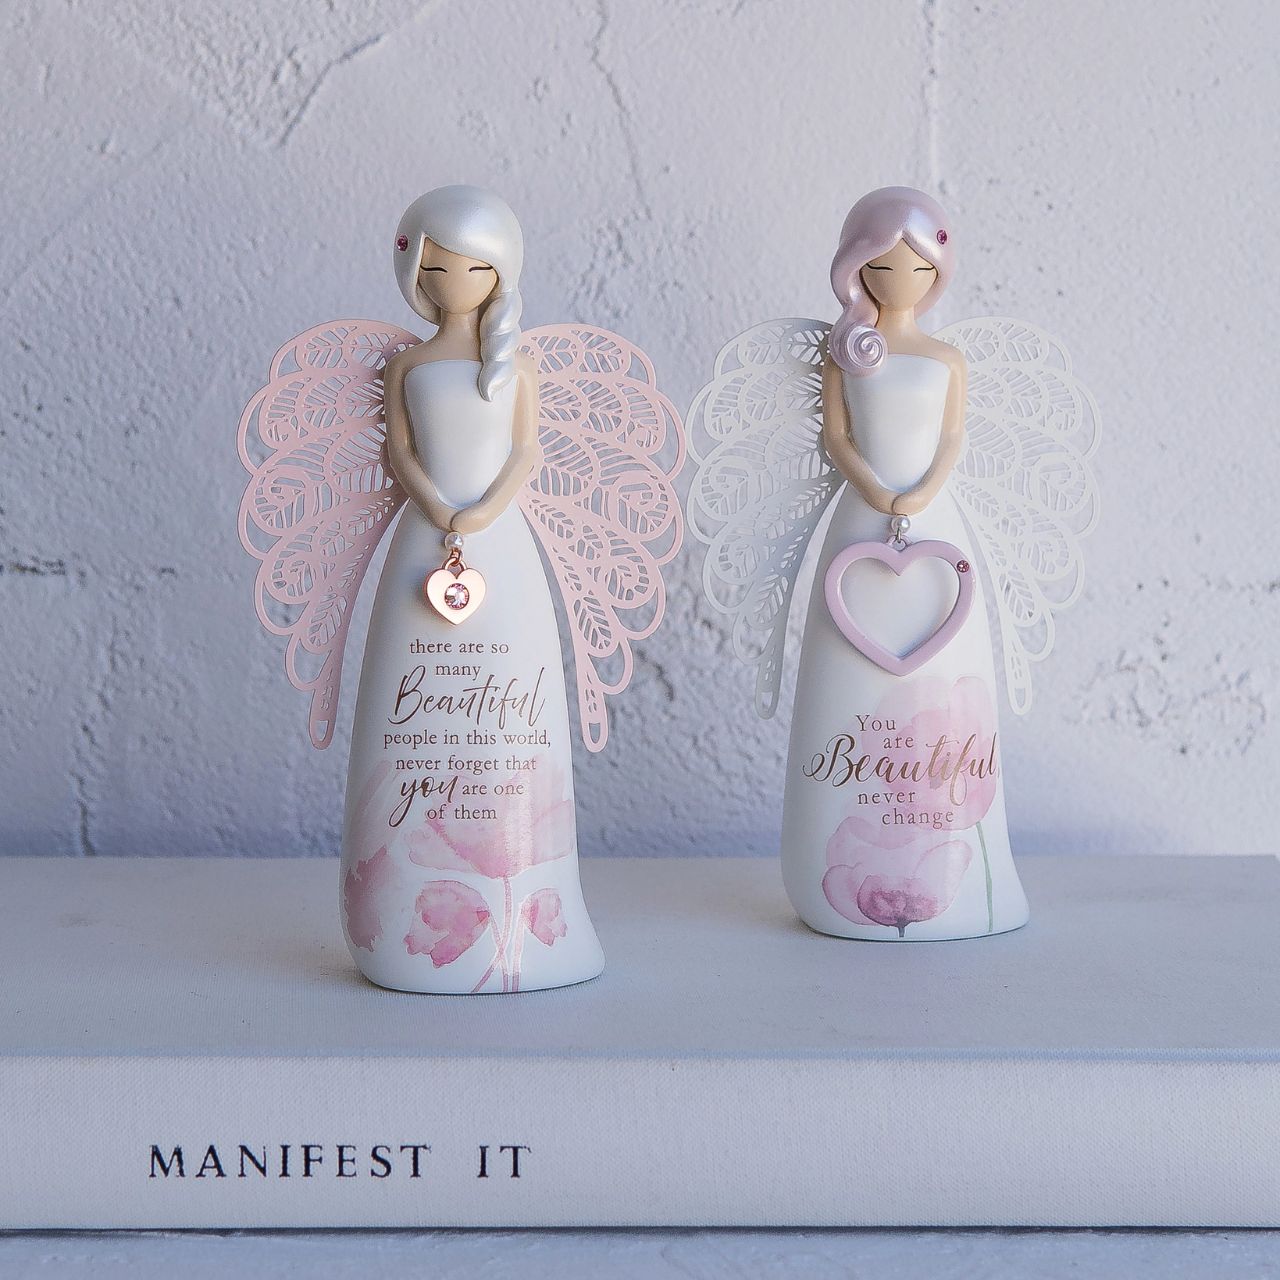 You Are An Angel You Are Beautiful Figurine  Looking for a thoughtful gift that's both beautiful and meaningful. These stunning angels are the perfect way to show someone special just how much they mean to you.